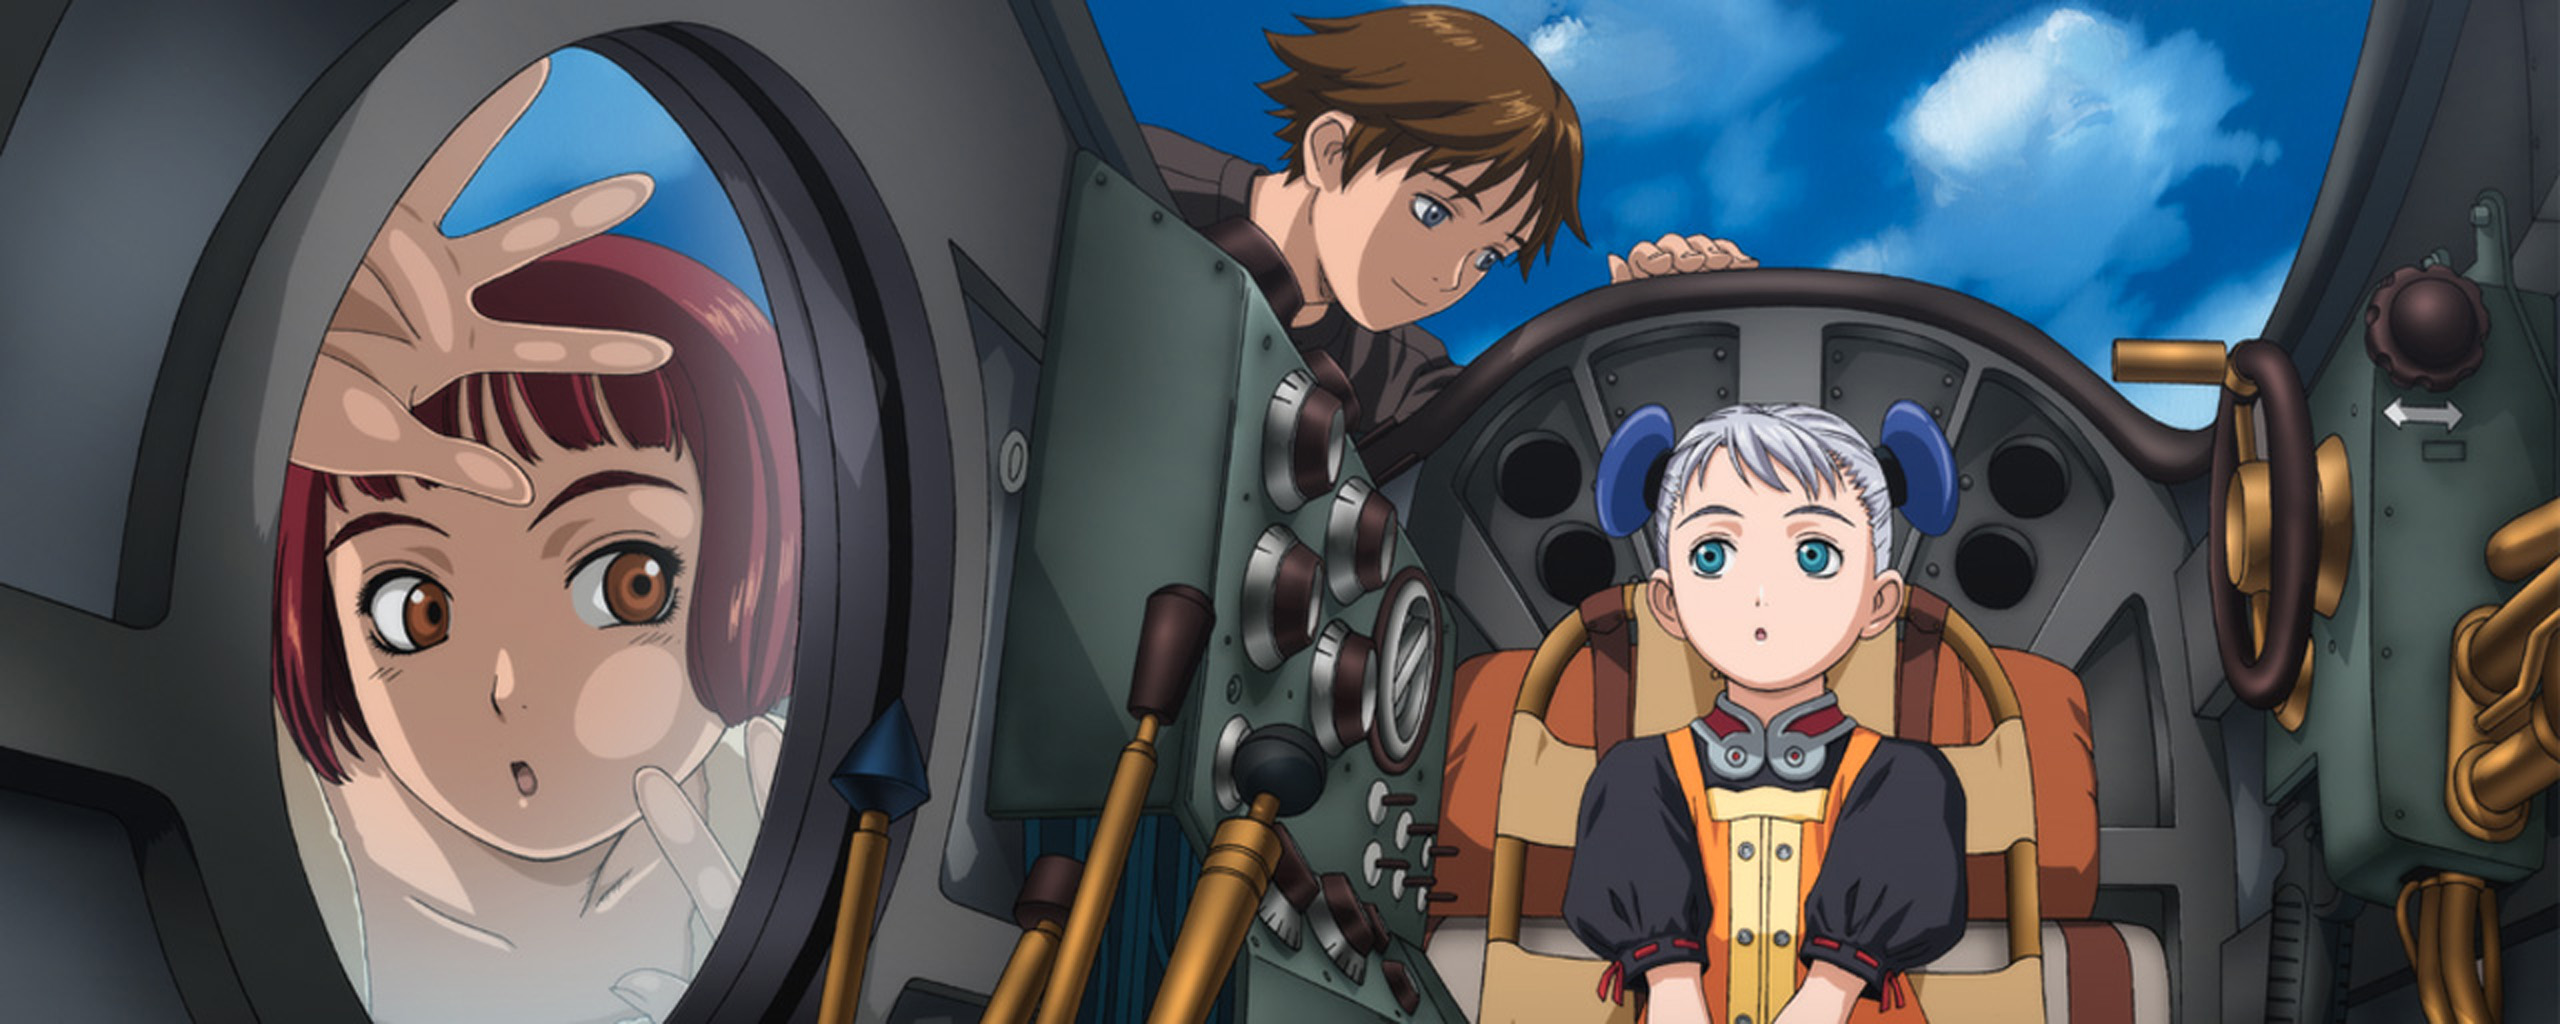 Last Exile  Fam The Silver Wing  Anime3000com